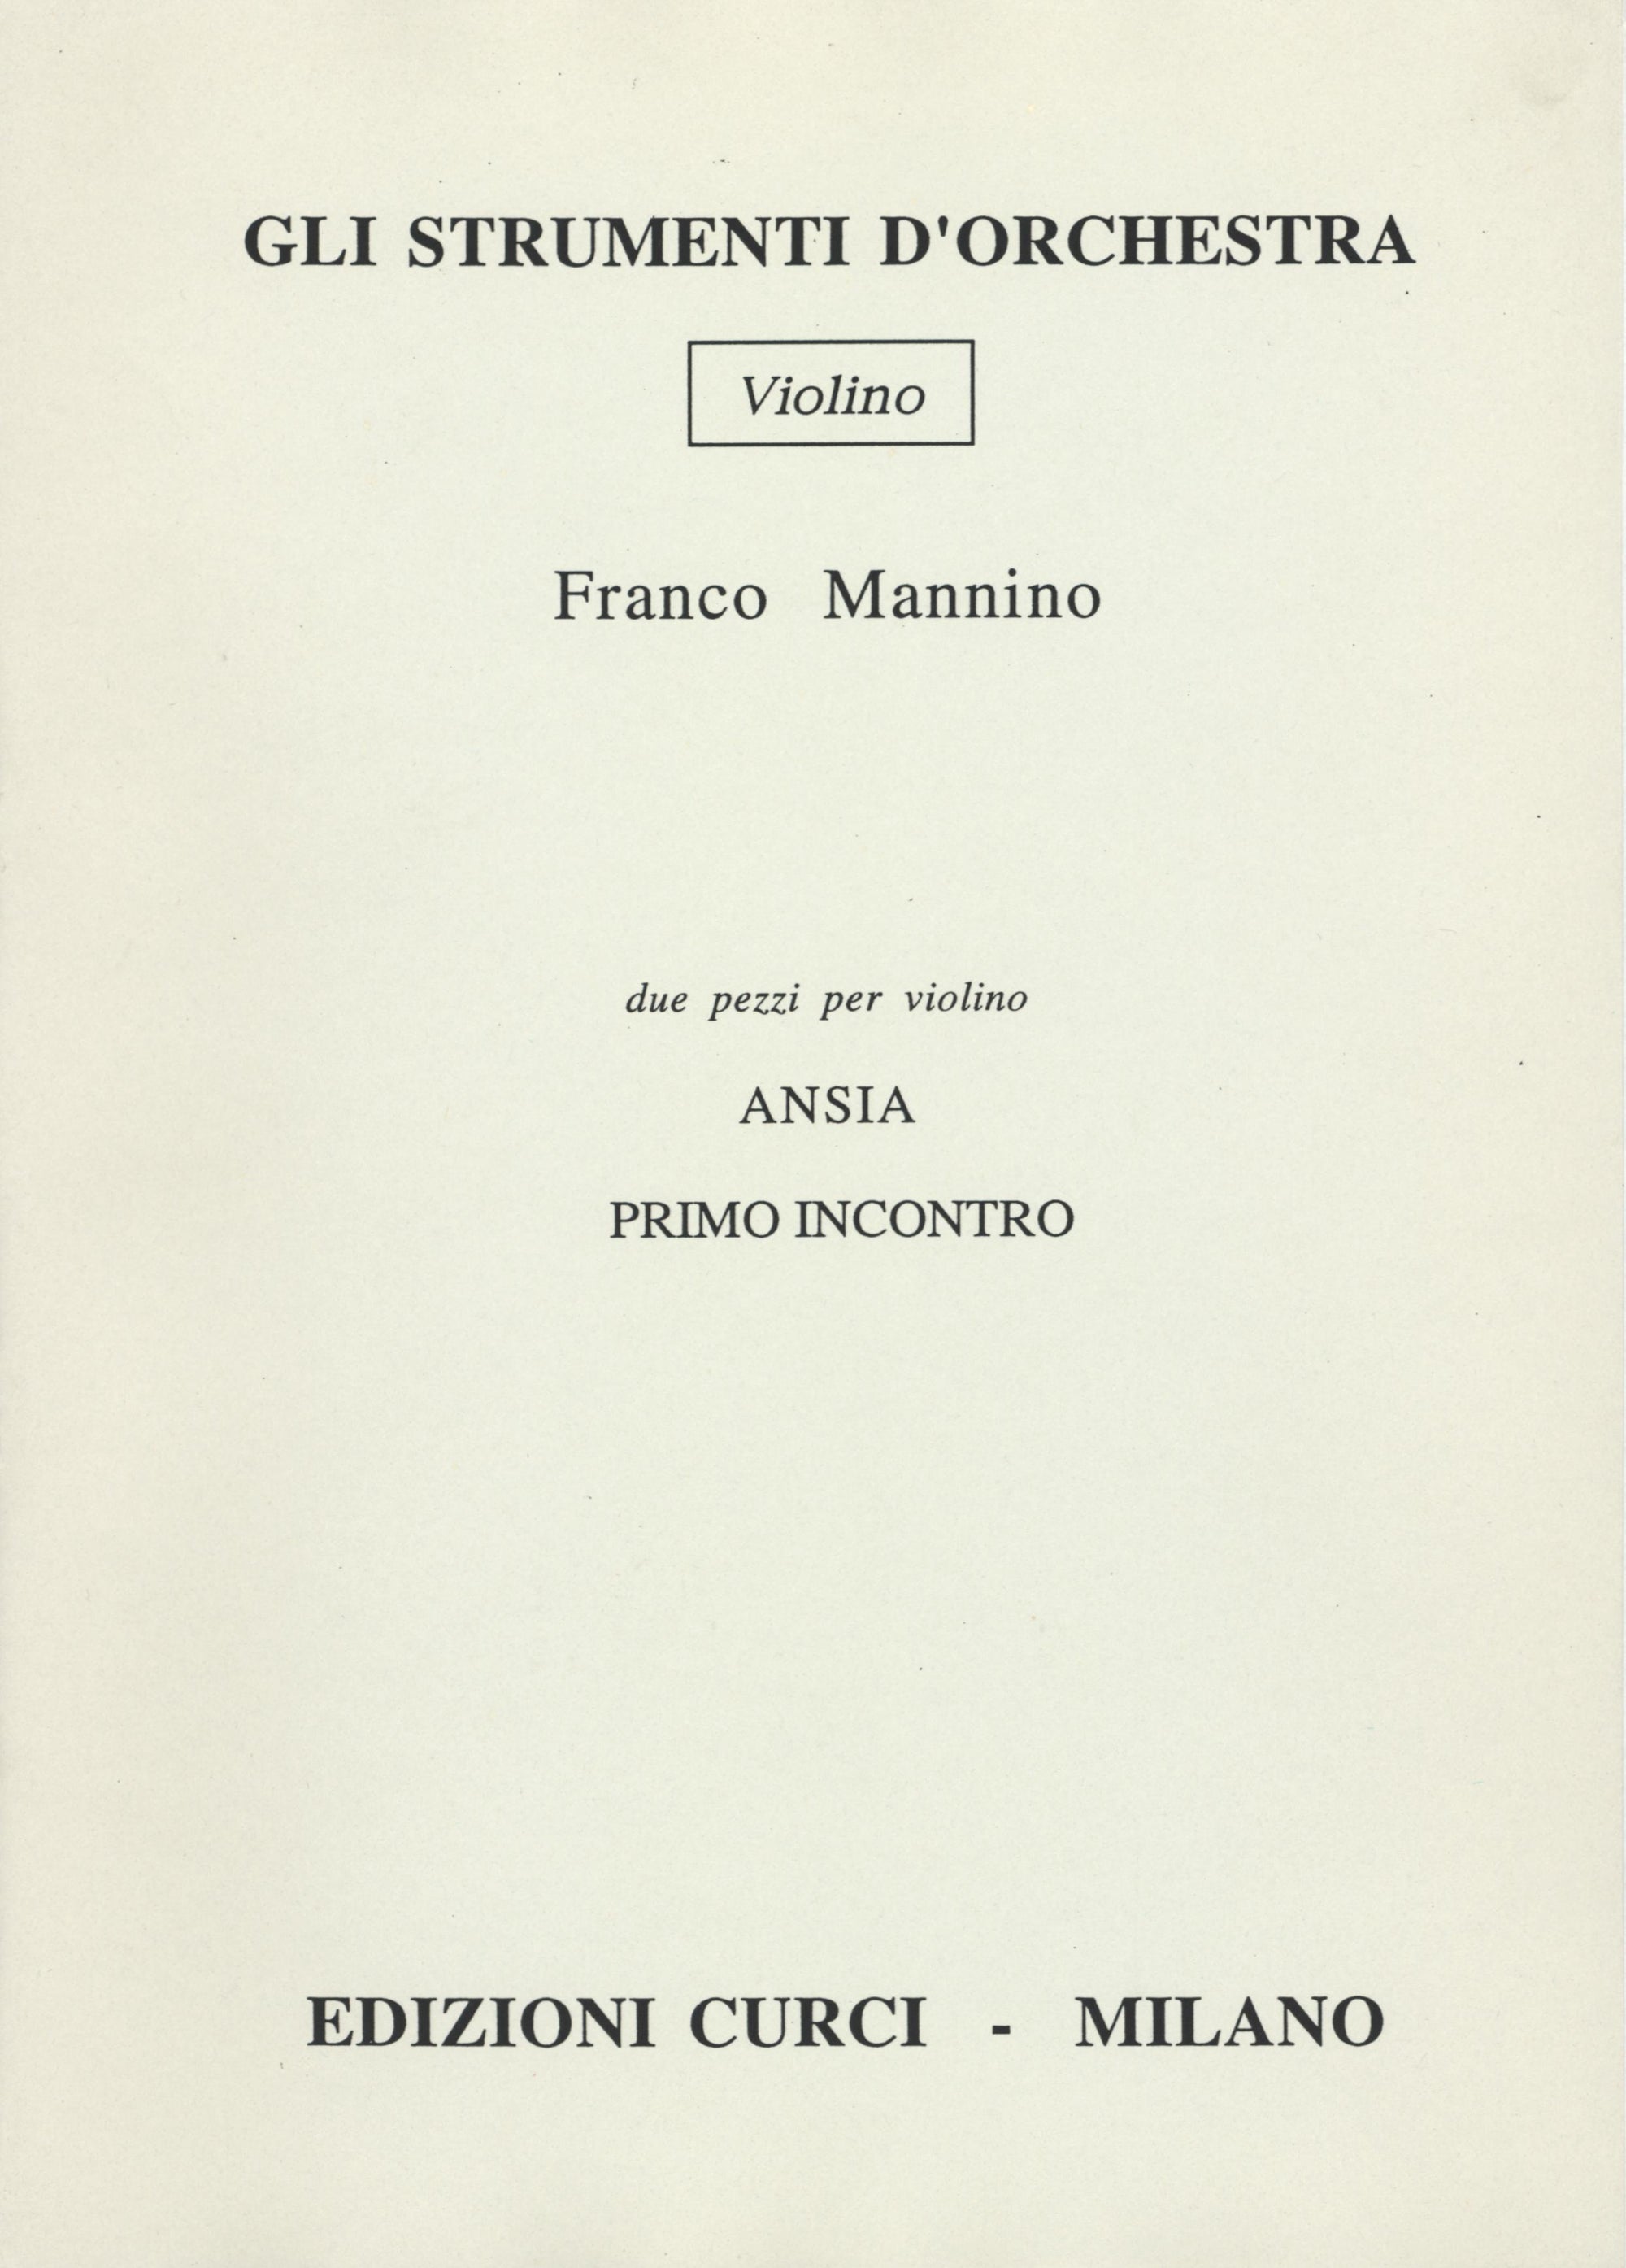 Mannino: Ansia, Op. 365 and Primo incontro, Op. 366